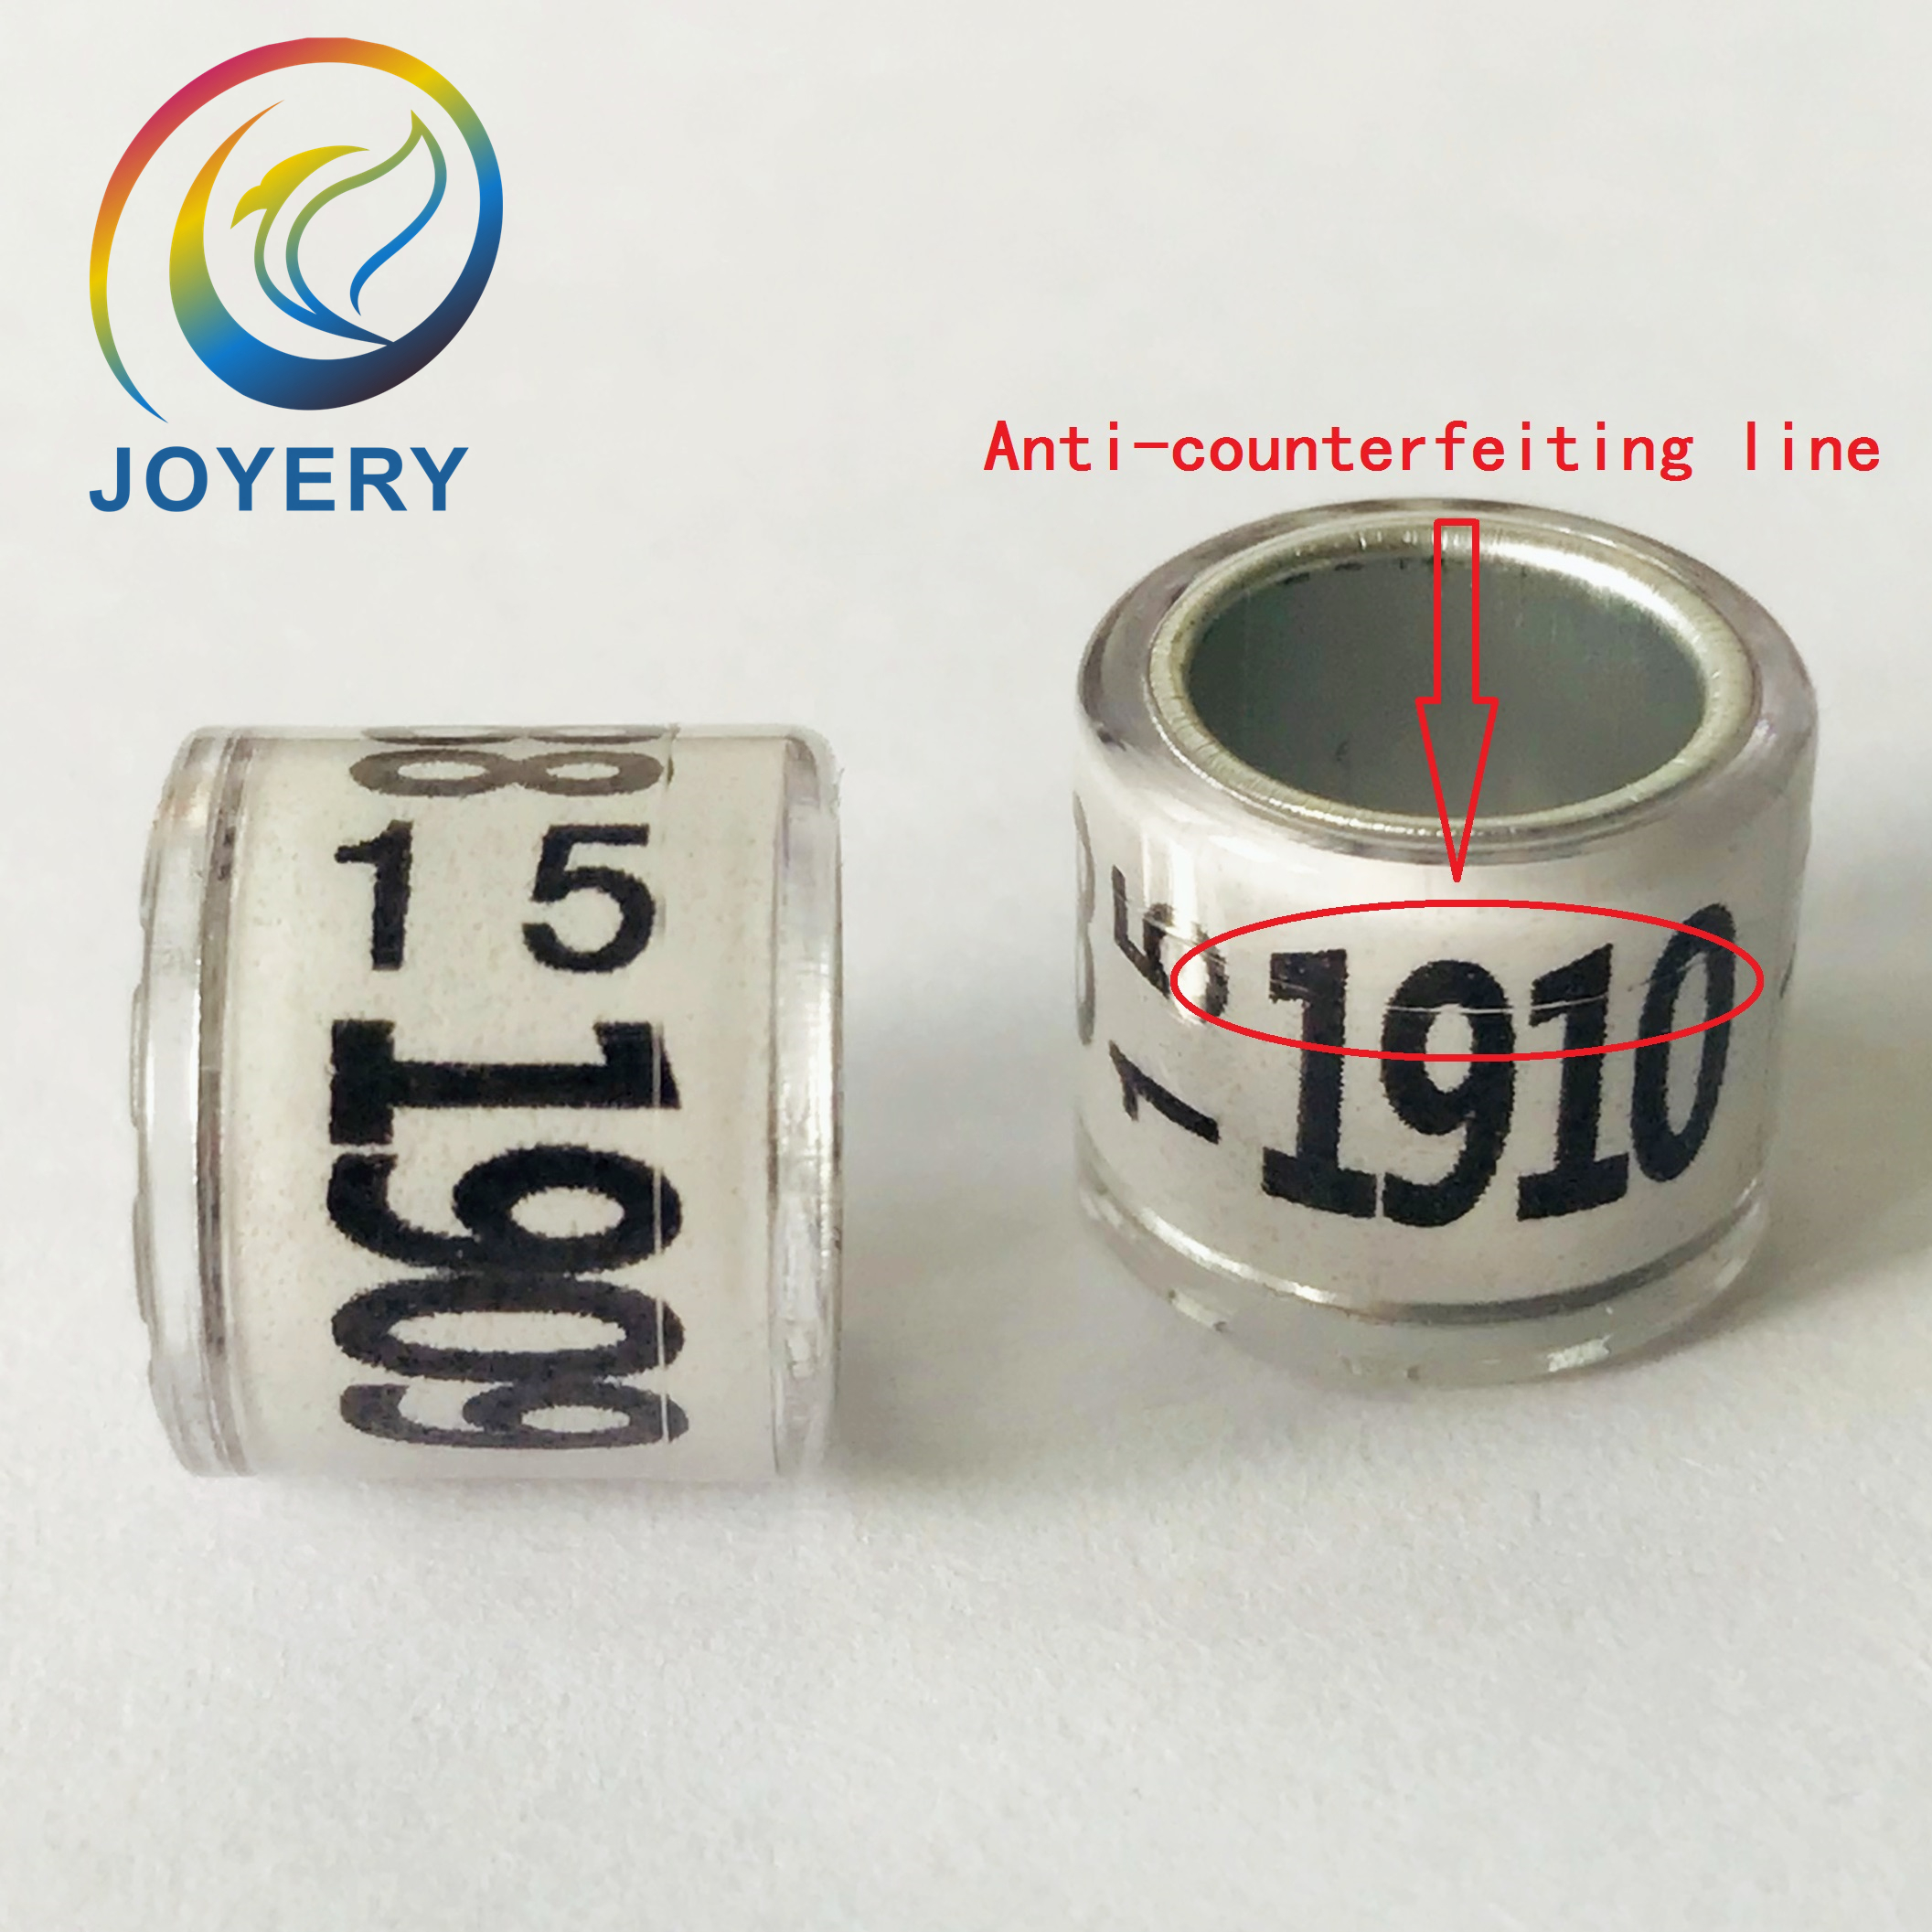 Anti-counterfeiting line pigeon rings